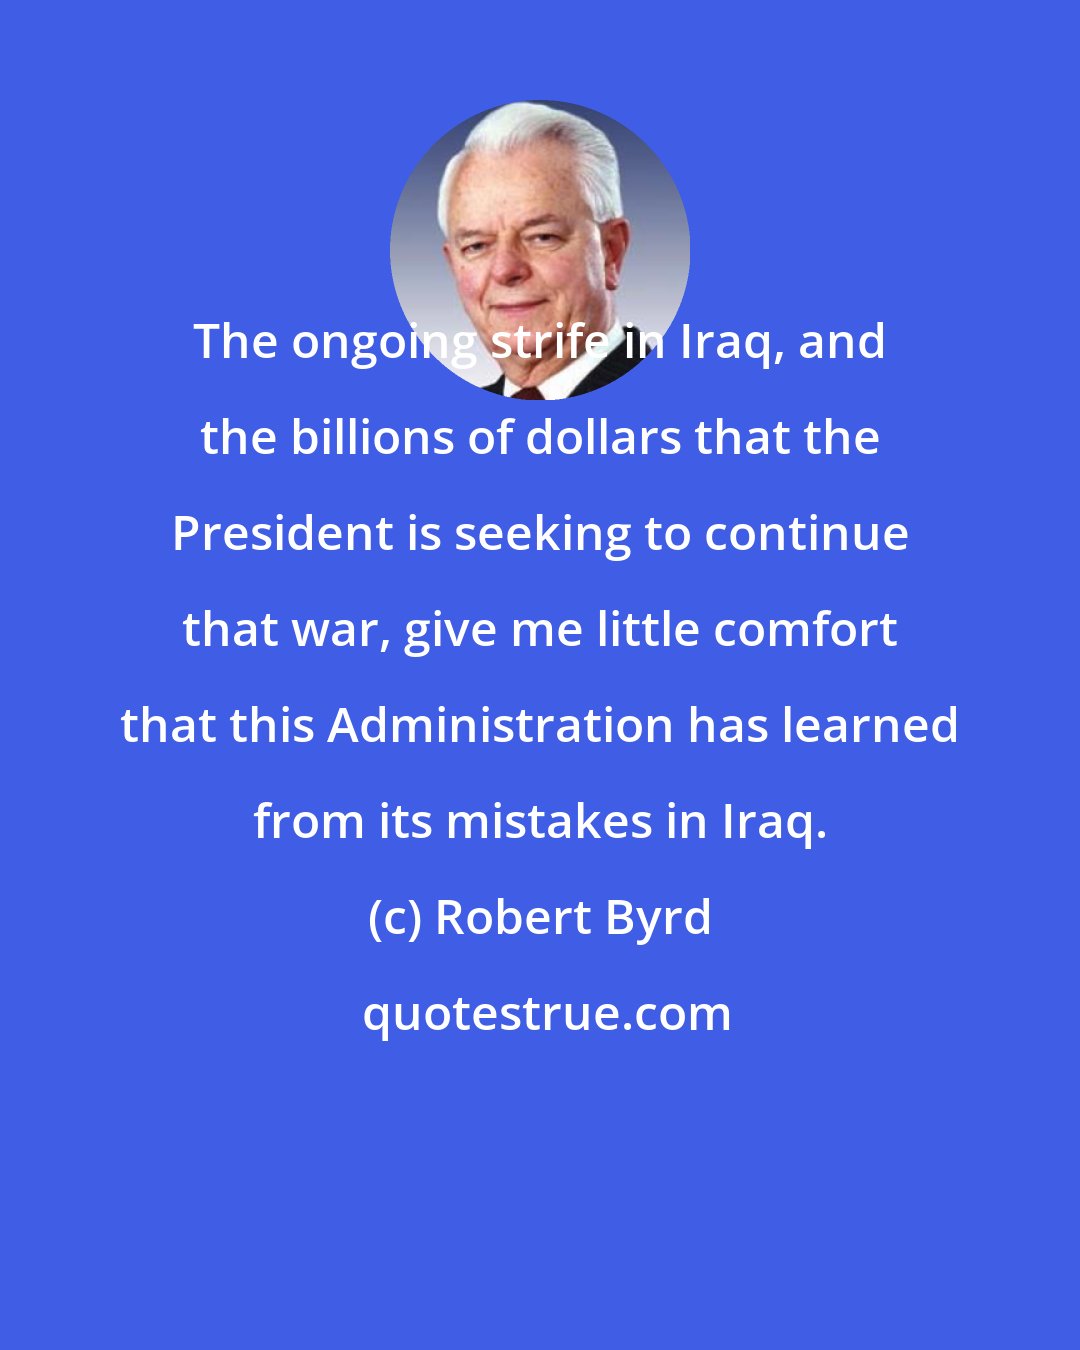 Robert Byrd: The ongoing strife in Iraq, and the billions of dollars that the President is seeking to continue that war, give me little comfort that this Administration has learned from its mistakes in Iraq.